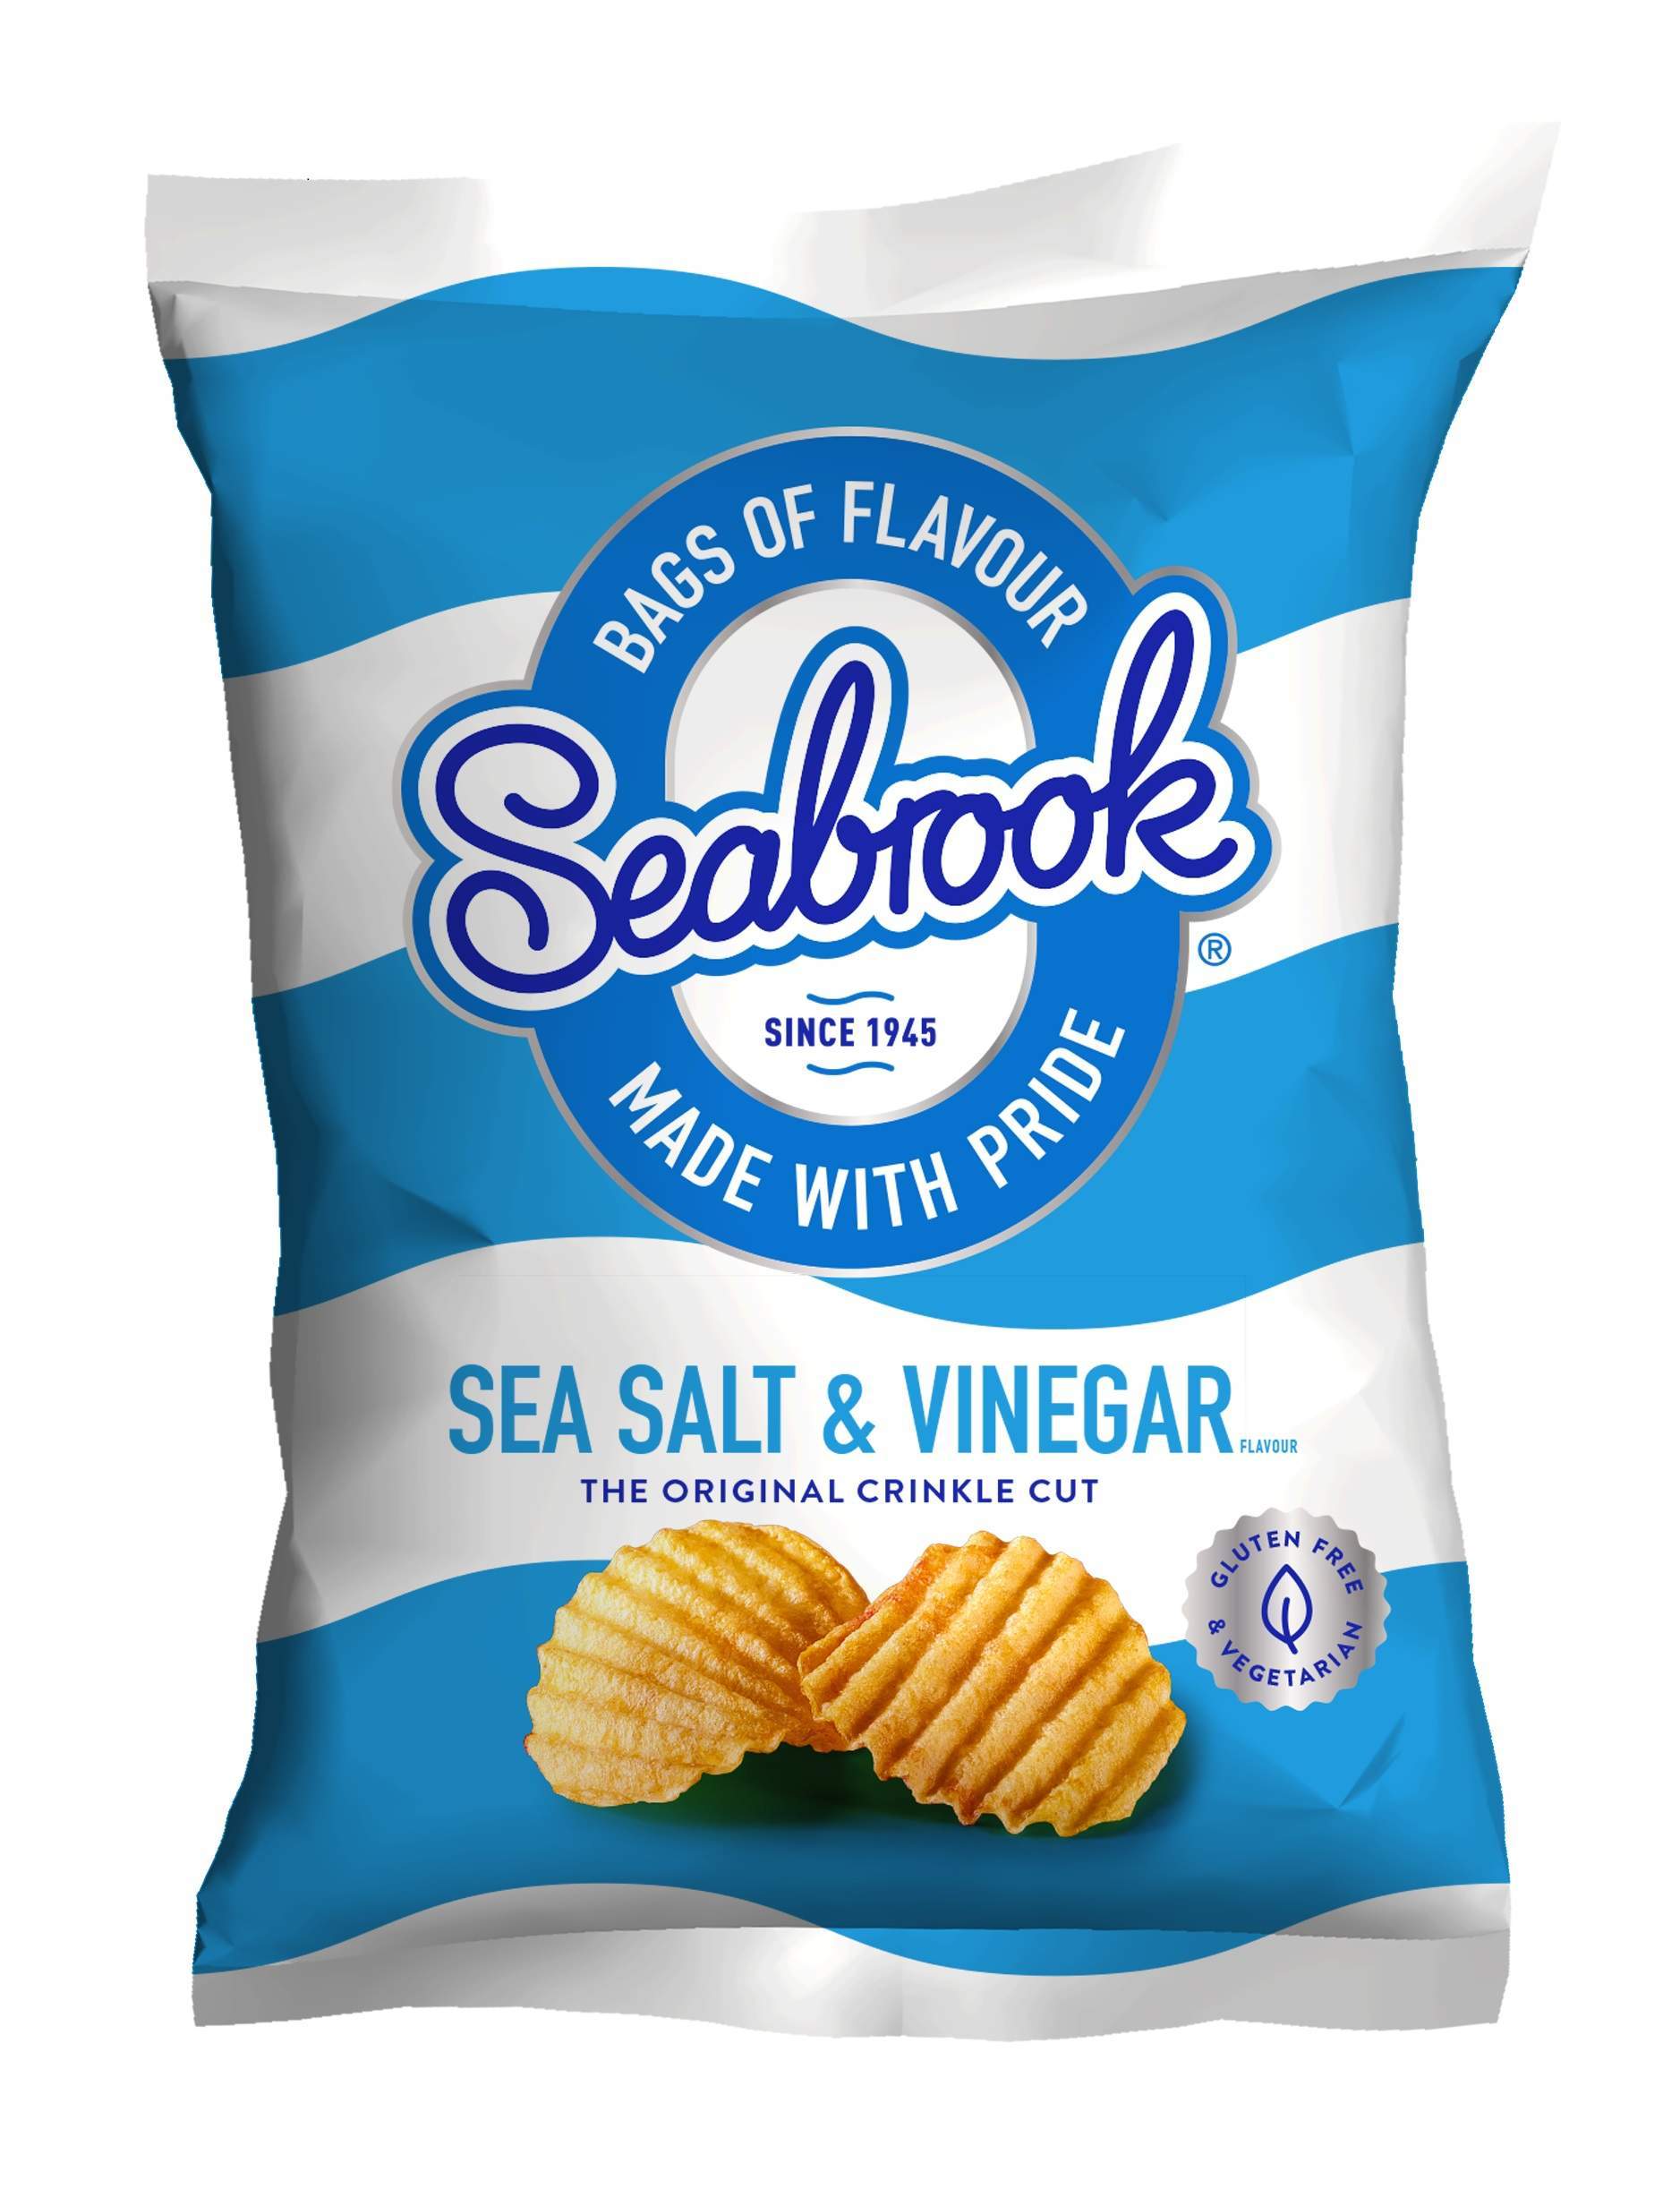 Seabrook unveils bold new packaging to boost consumer appeal